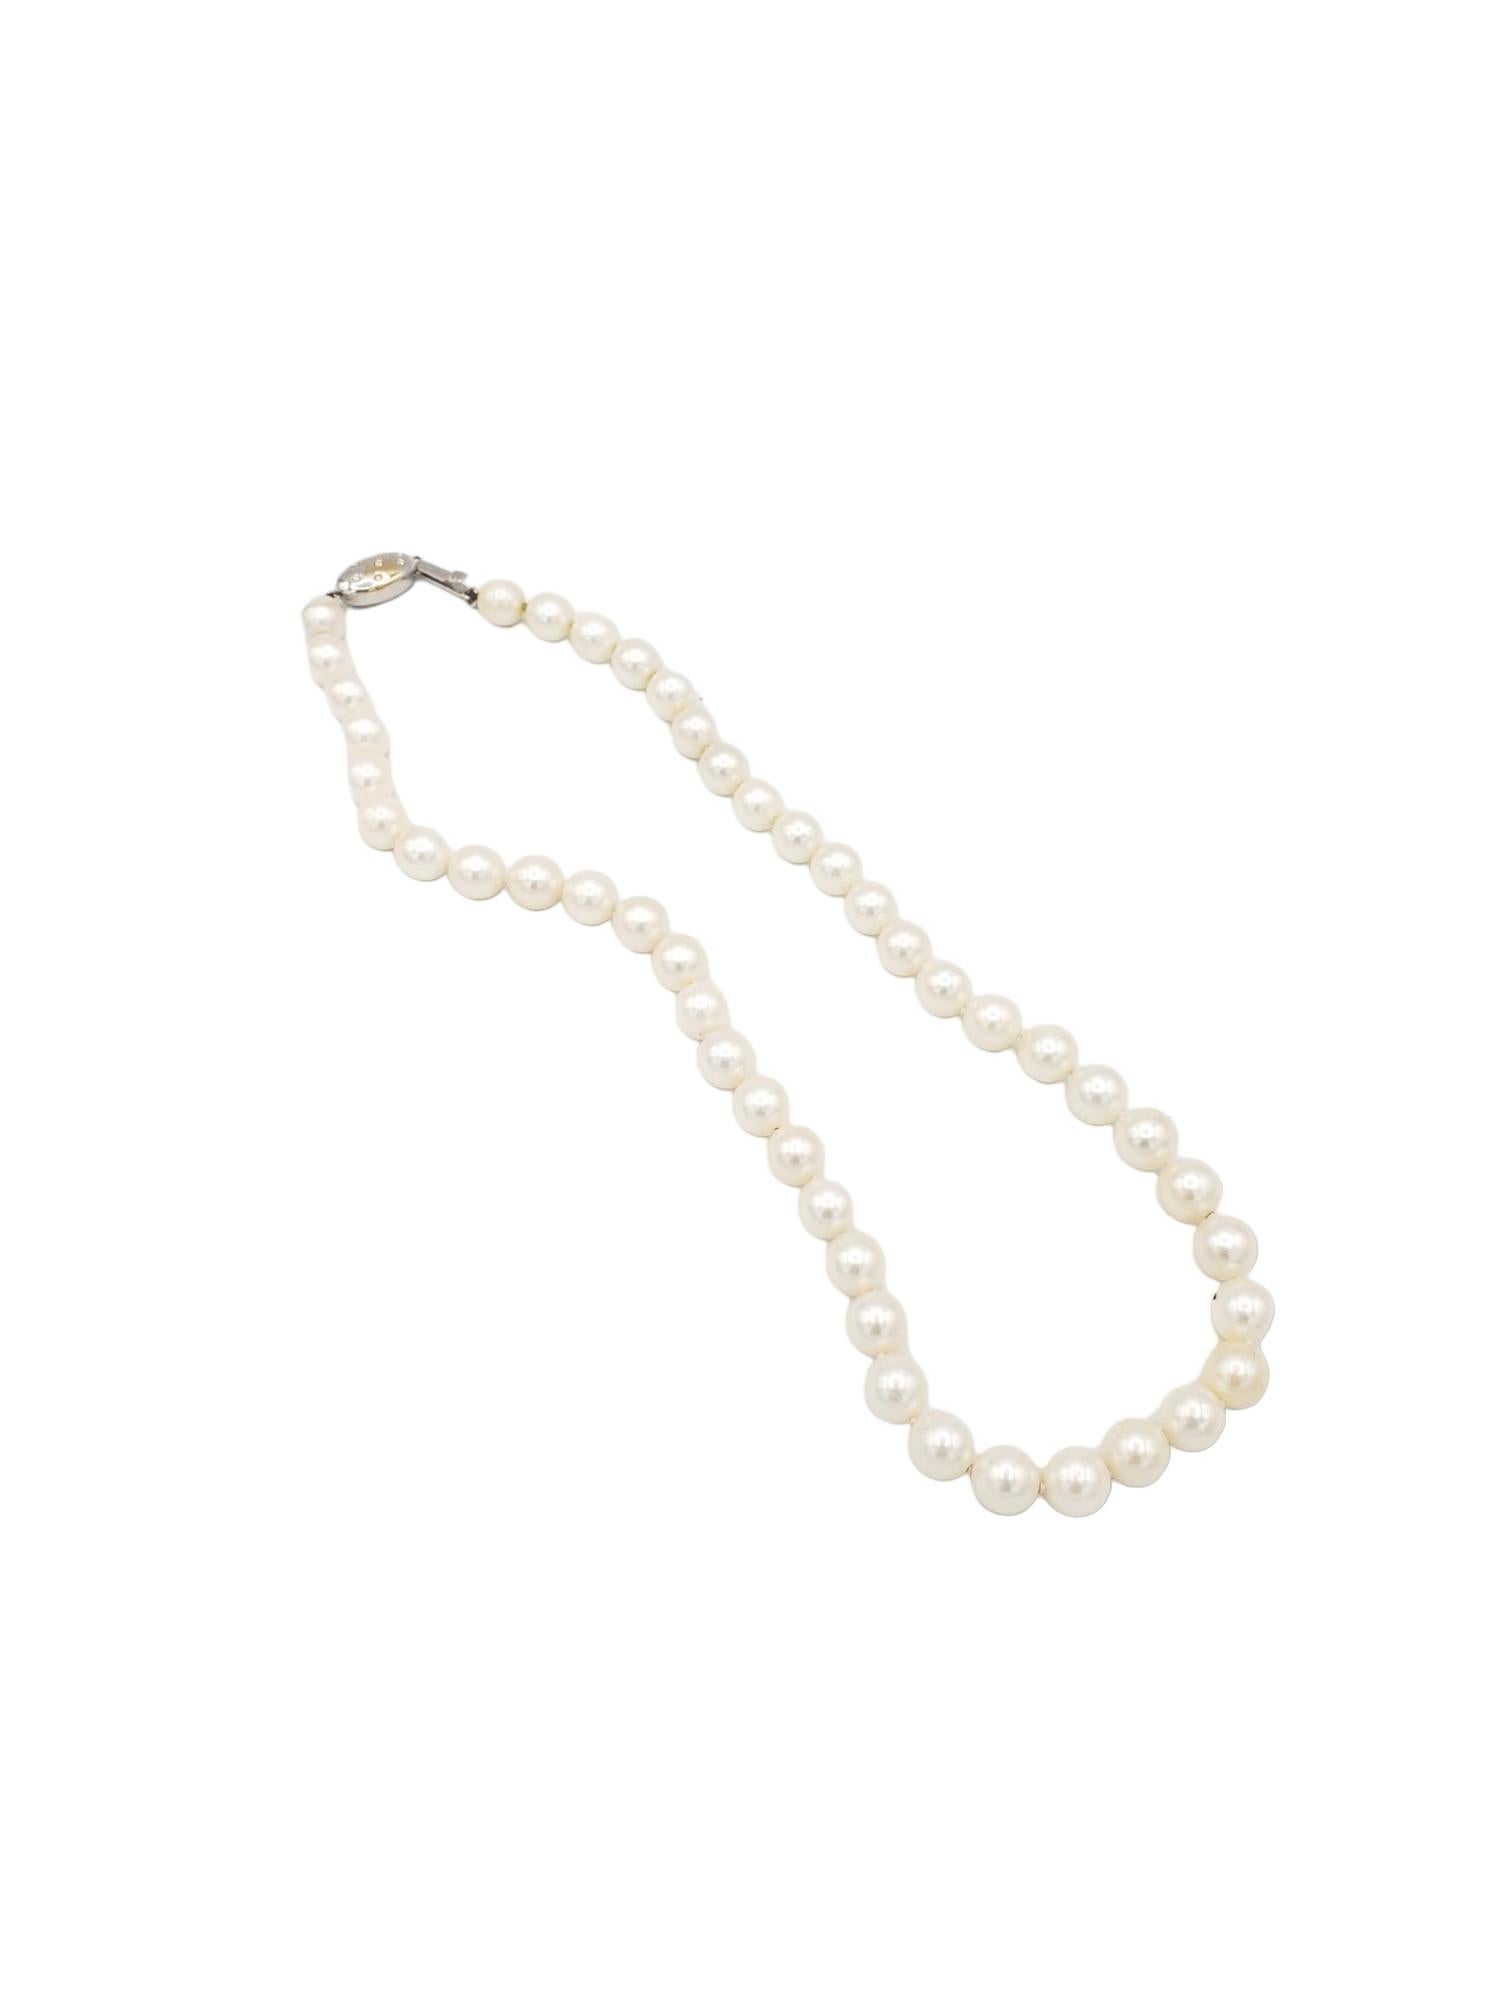 NEW AAA+ Quality Japanese Akoya Salt Water White Pearl Necklace For Sale 3